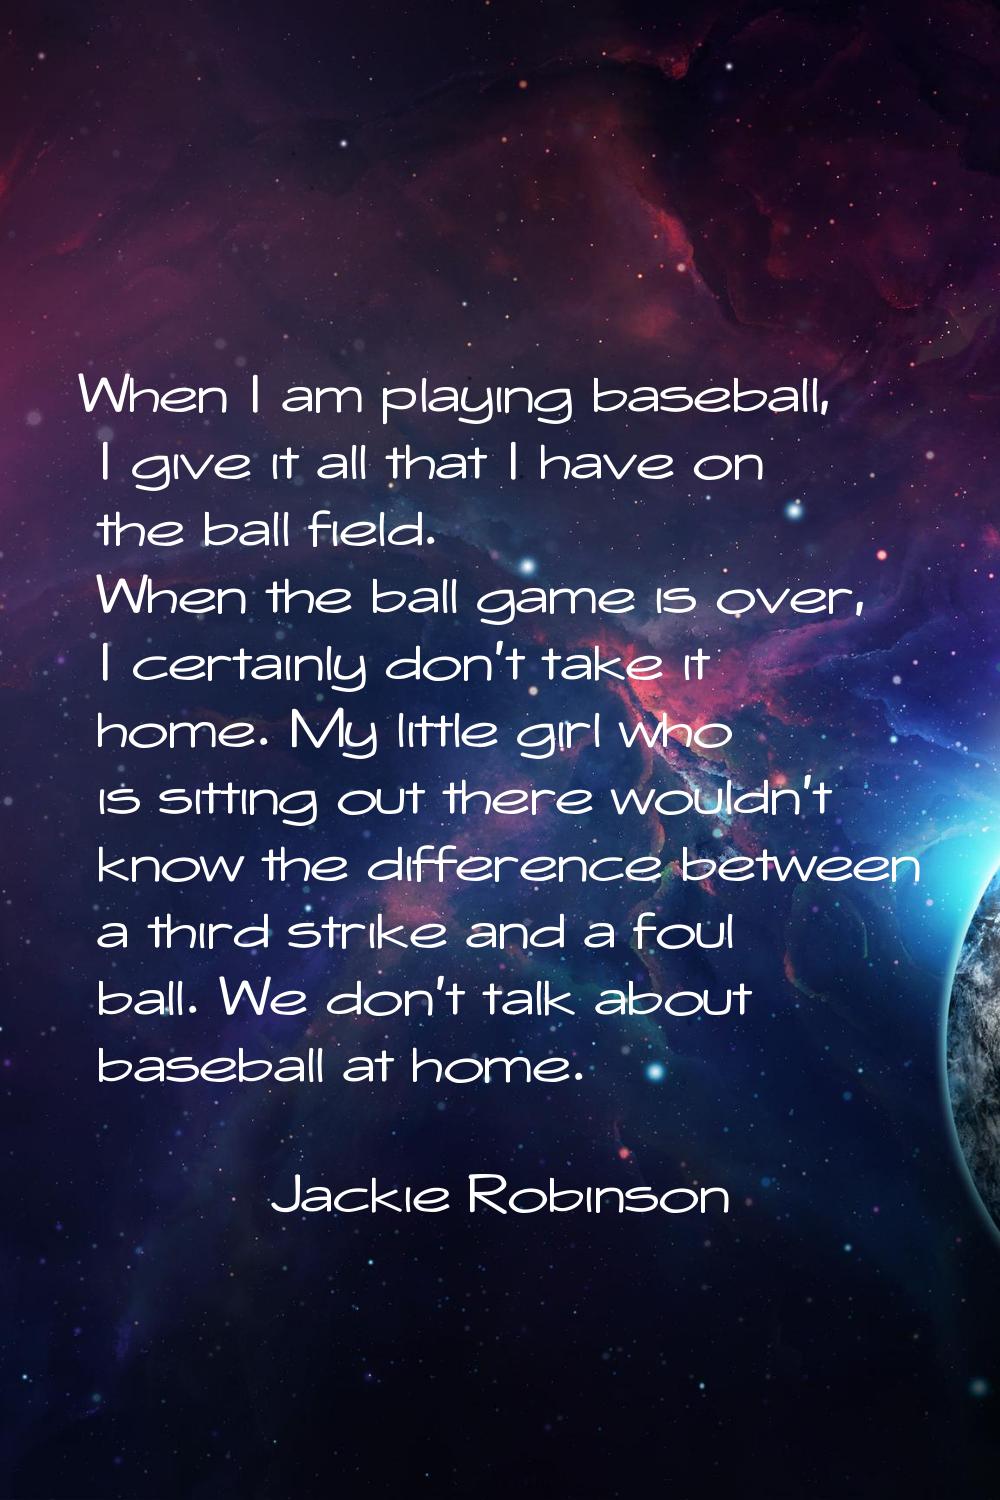 When I am playing baseball, I give it all that I have on the ball field. When the ball game is over